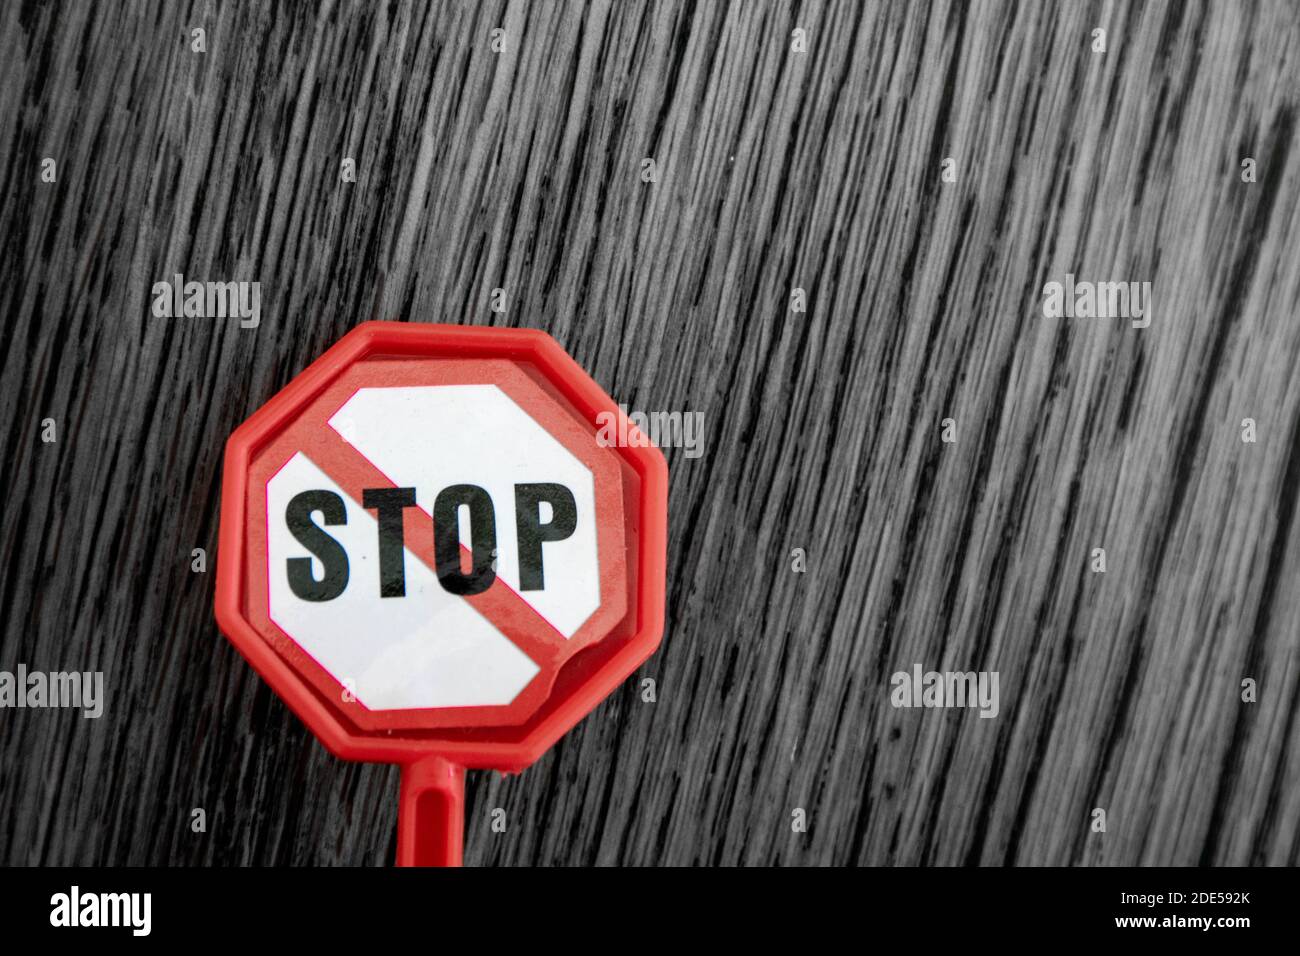 Isolated plastic toy warning sign - STOP. Danger ahead, do not enter, forbidden, construction sight, road sign, signpost concept background. Isolated Stock Photo